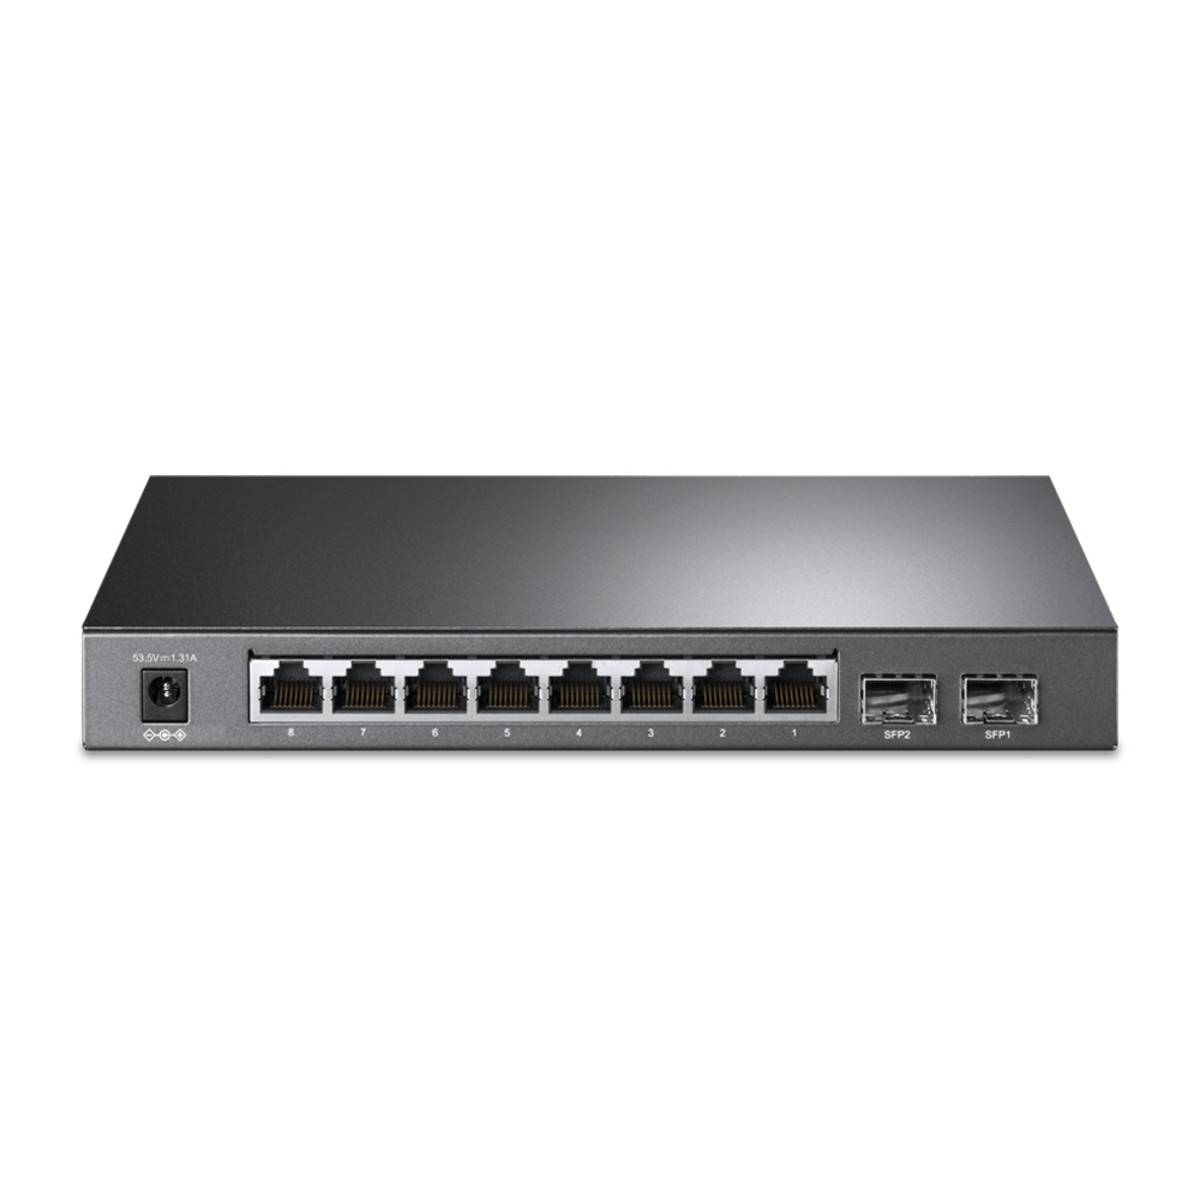 8P Gb Smart Poe Switch With 2 Sfp Slots